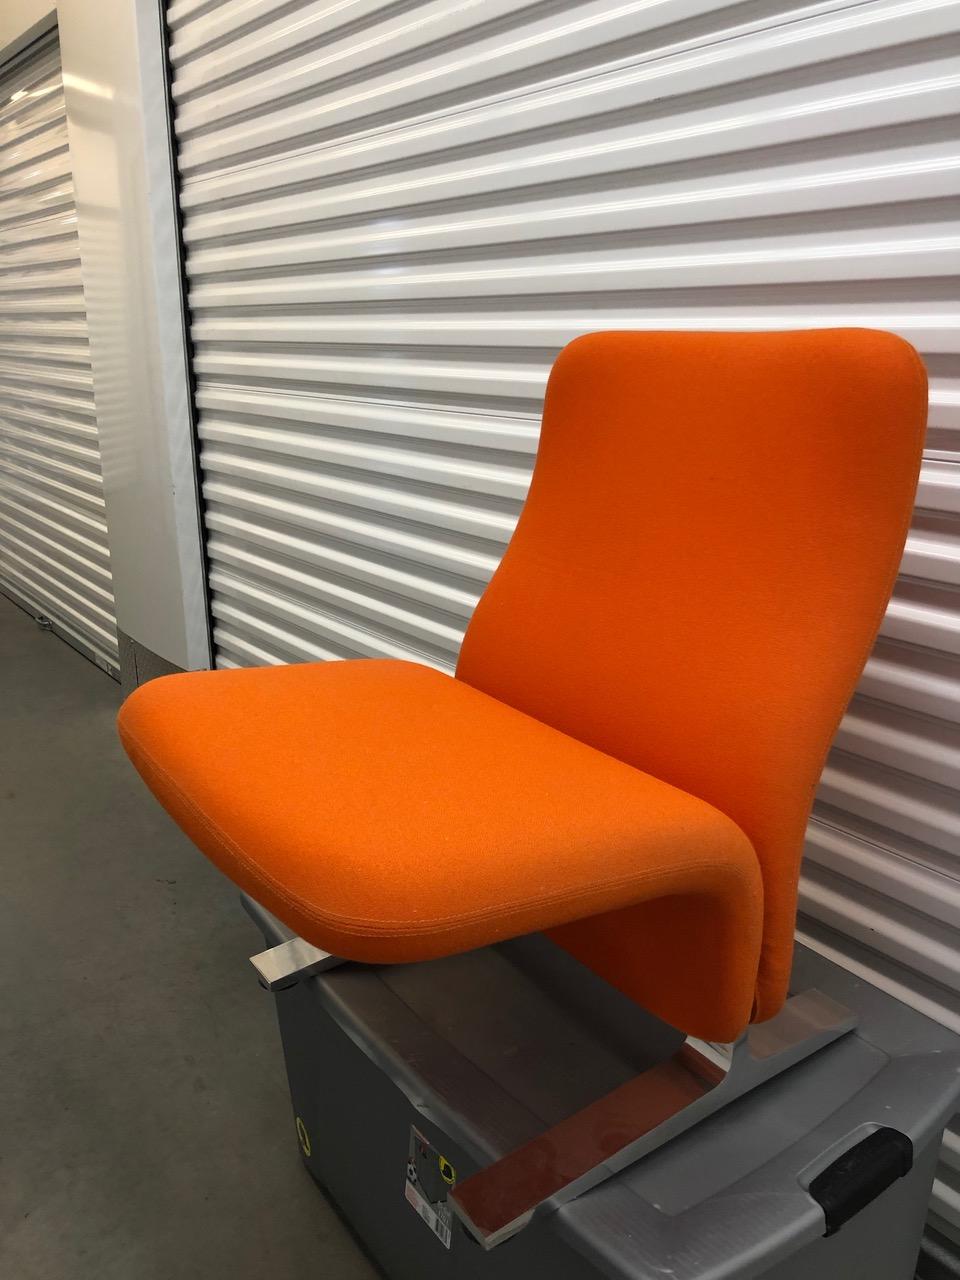 Iconic Artifort Concorde is a lounge chair without armrests. It was originally designed by Pierre Paulin for the airport waiting space of the French plane 'Concorde'. The chairs were named after this plane.